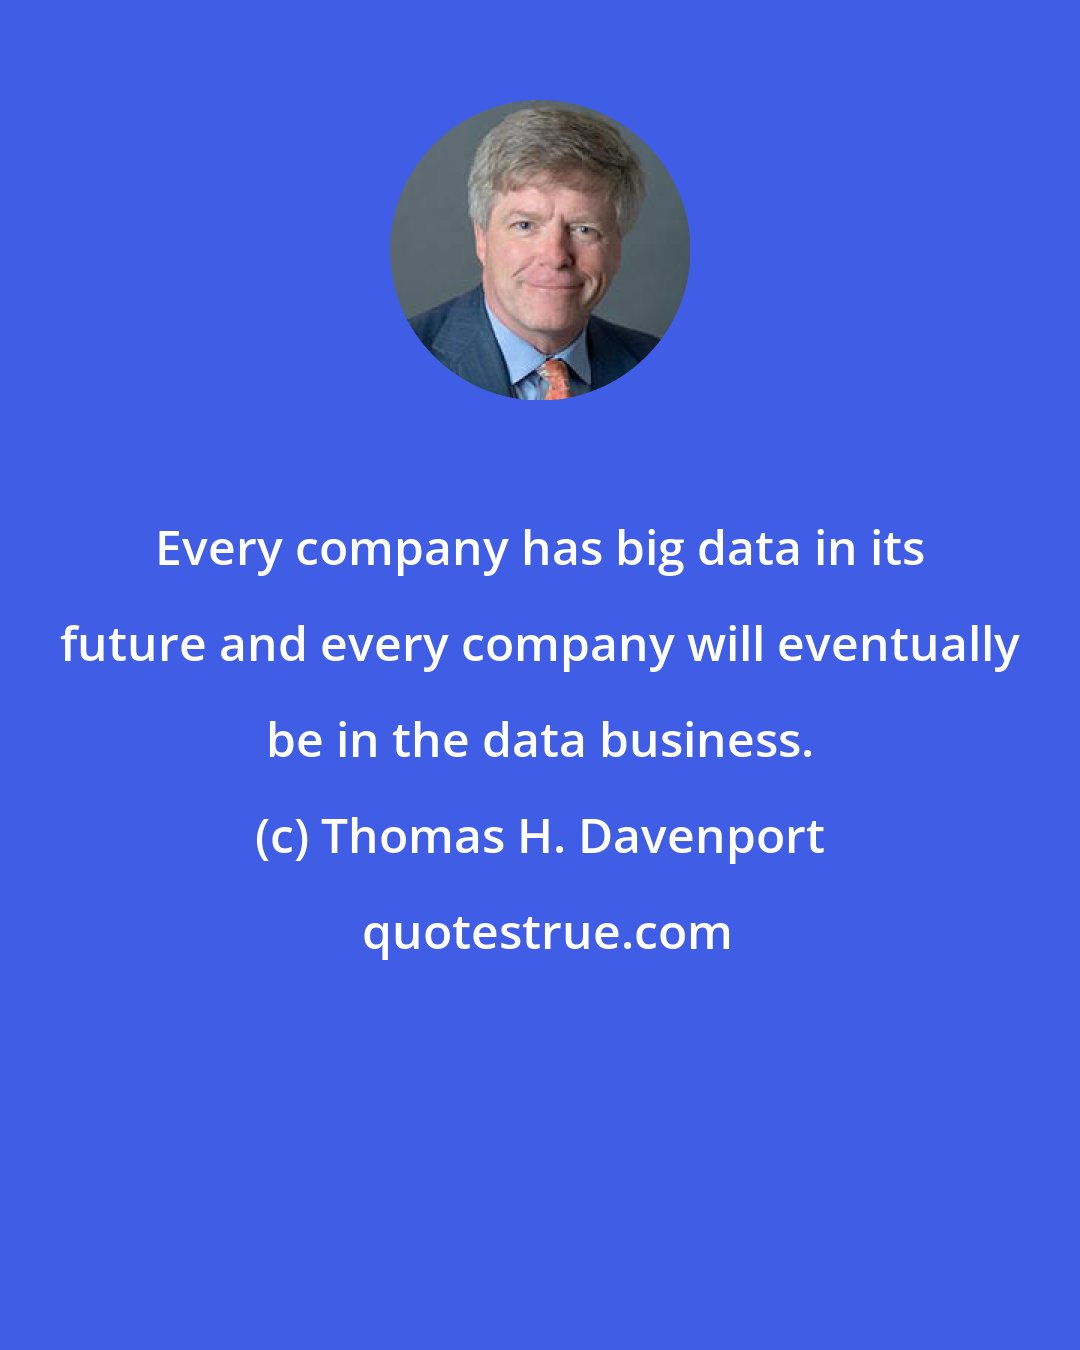 Thomas H. Davenport: Every company has big data in its future and every company will eventually be in the data business.